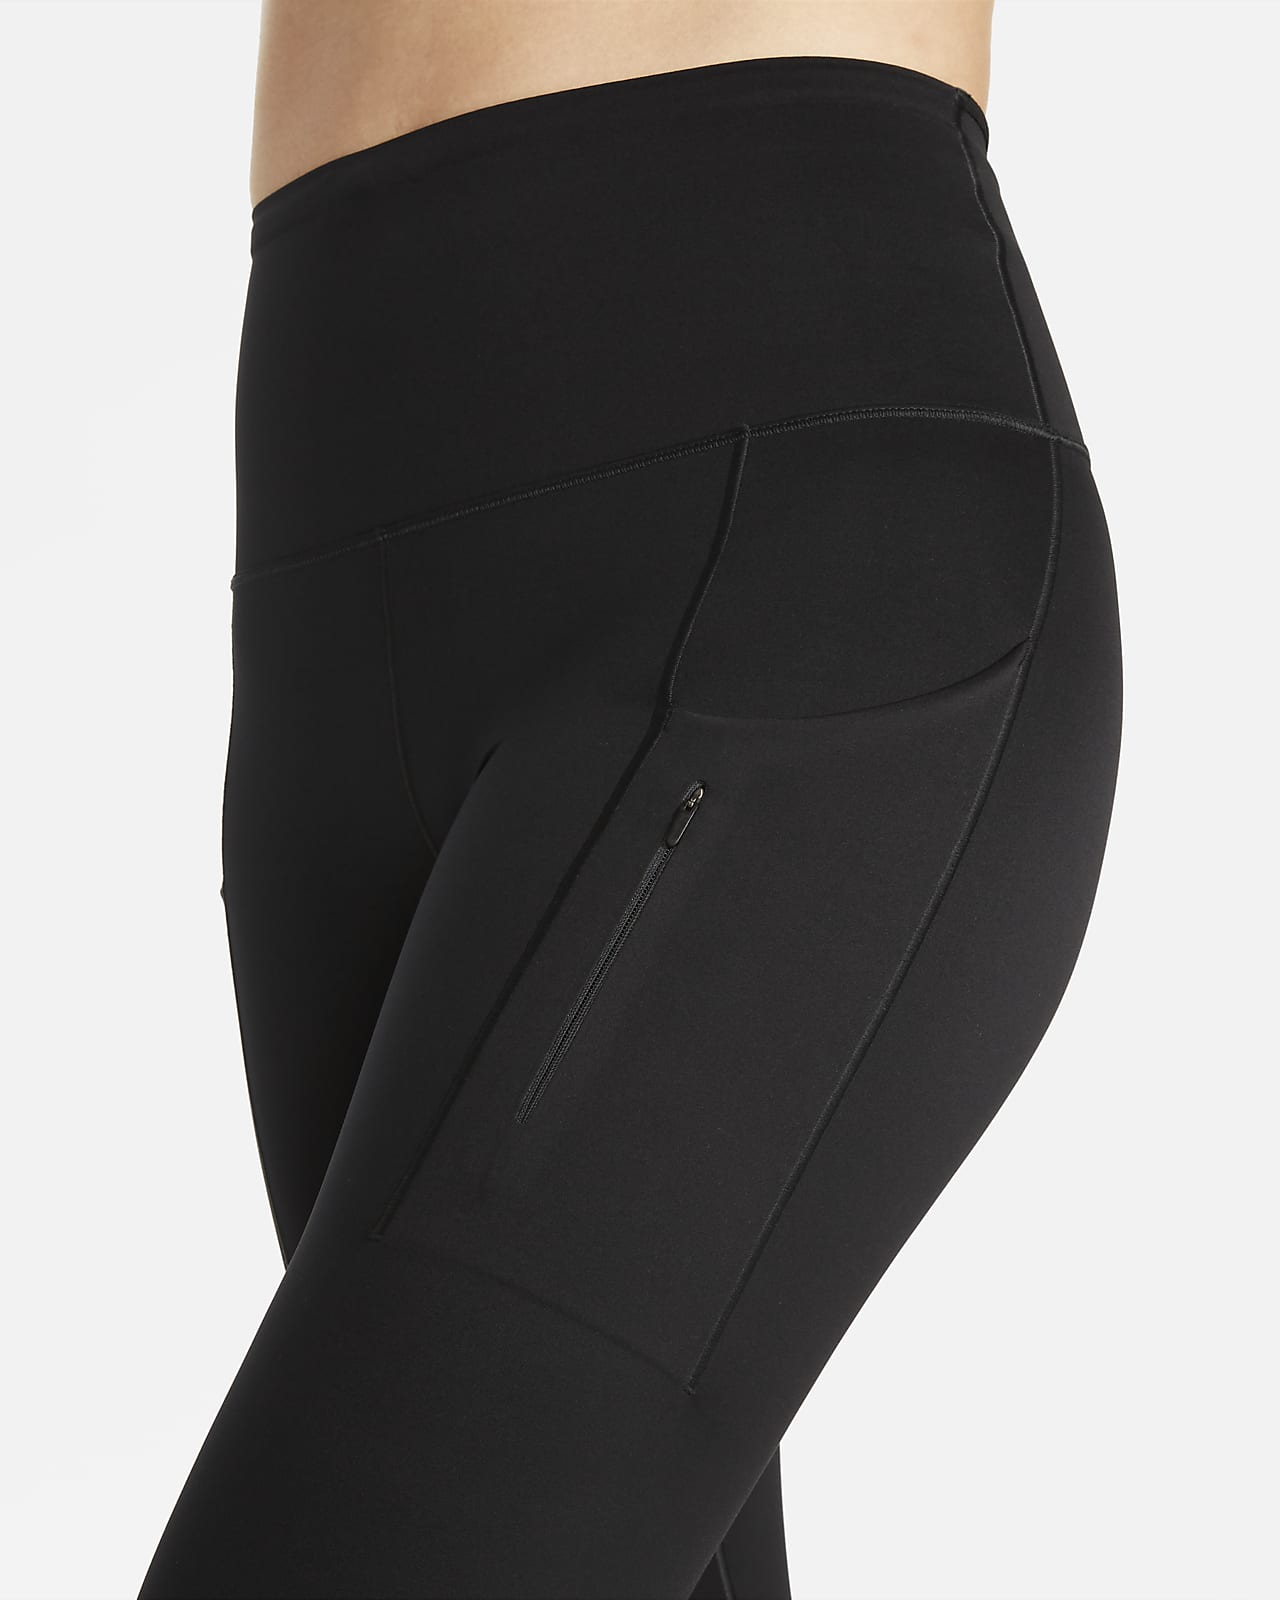 Nike Go Women's Firm-Support High-Waisted Capri Leggings with Pockets, Size  L Black/Black